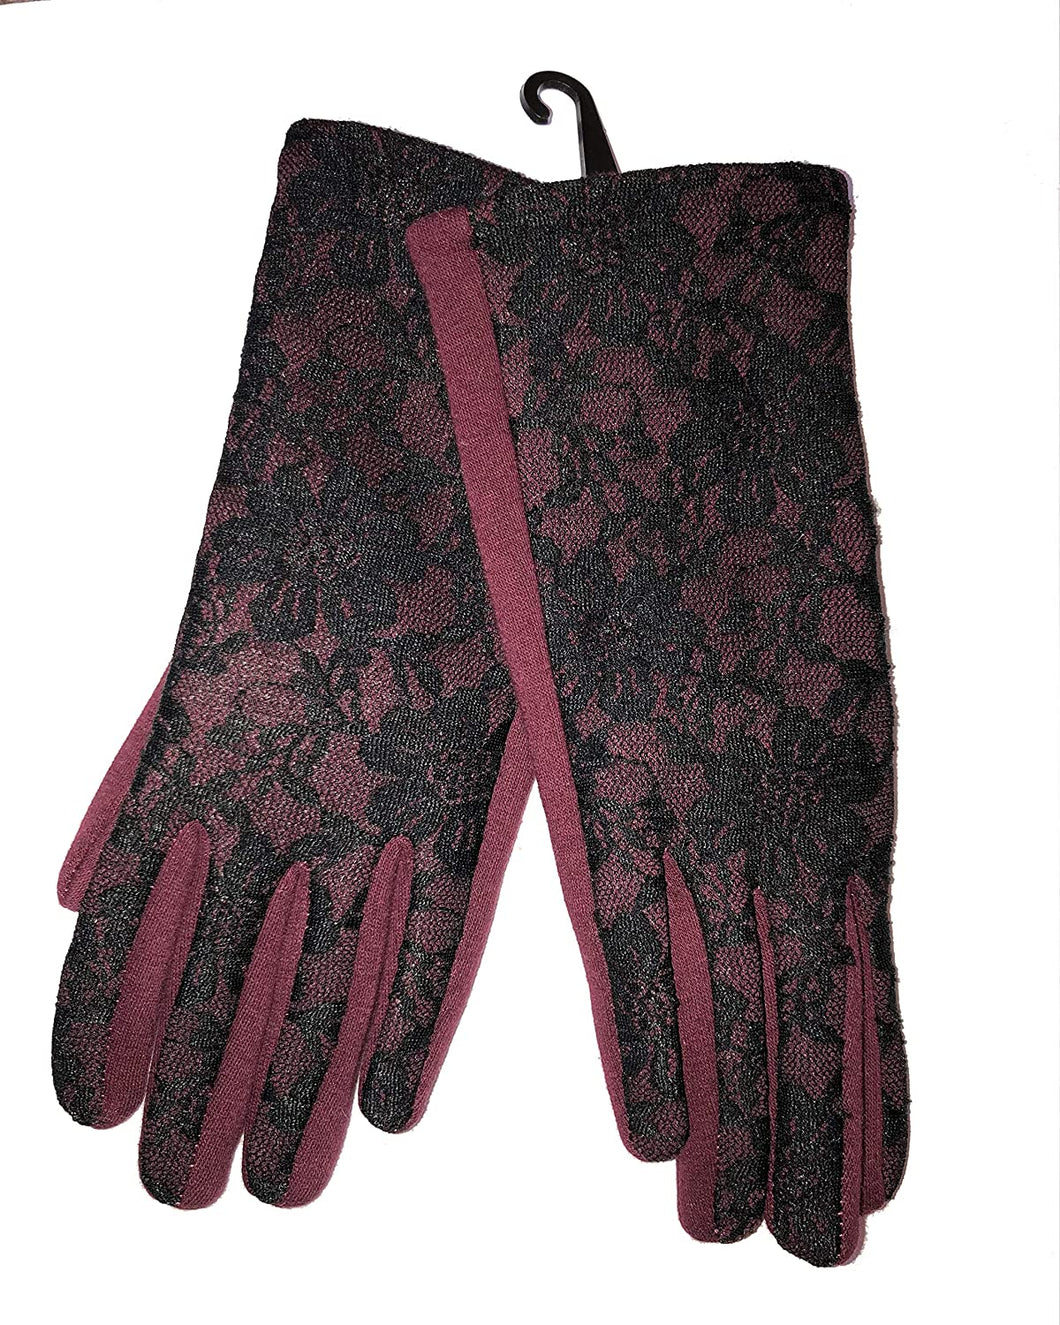 G1409 Burgundy with black lace ladies Gloves. One size